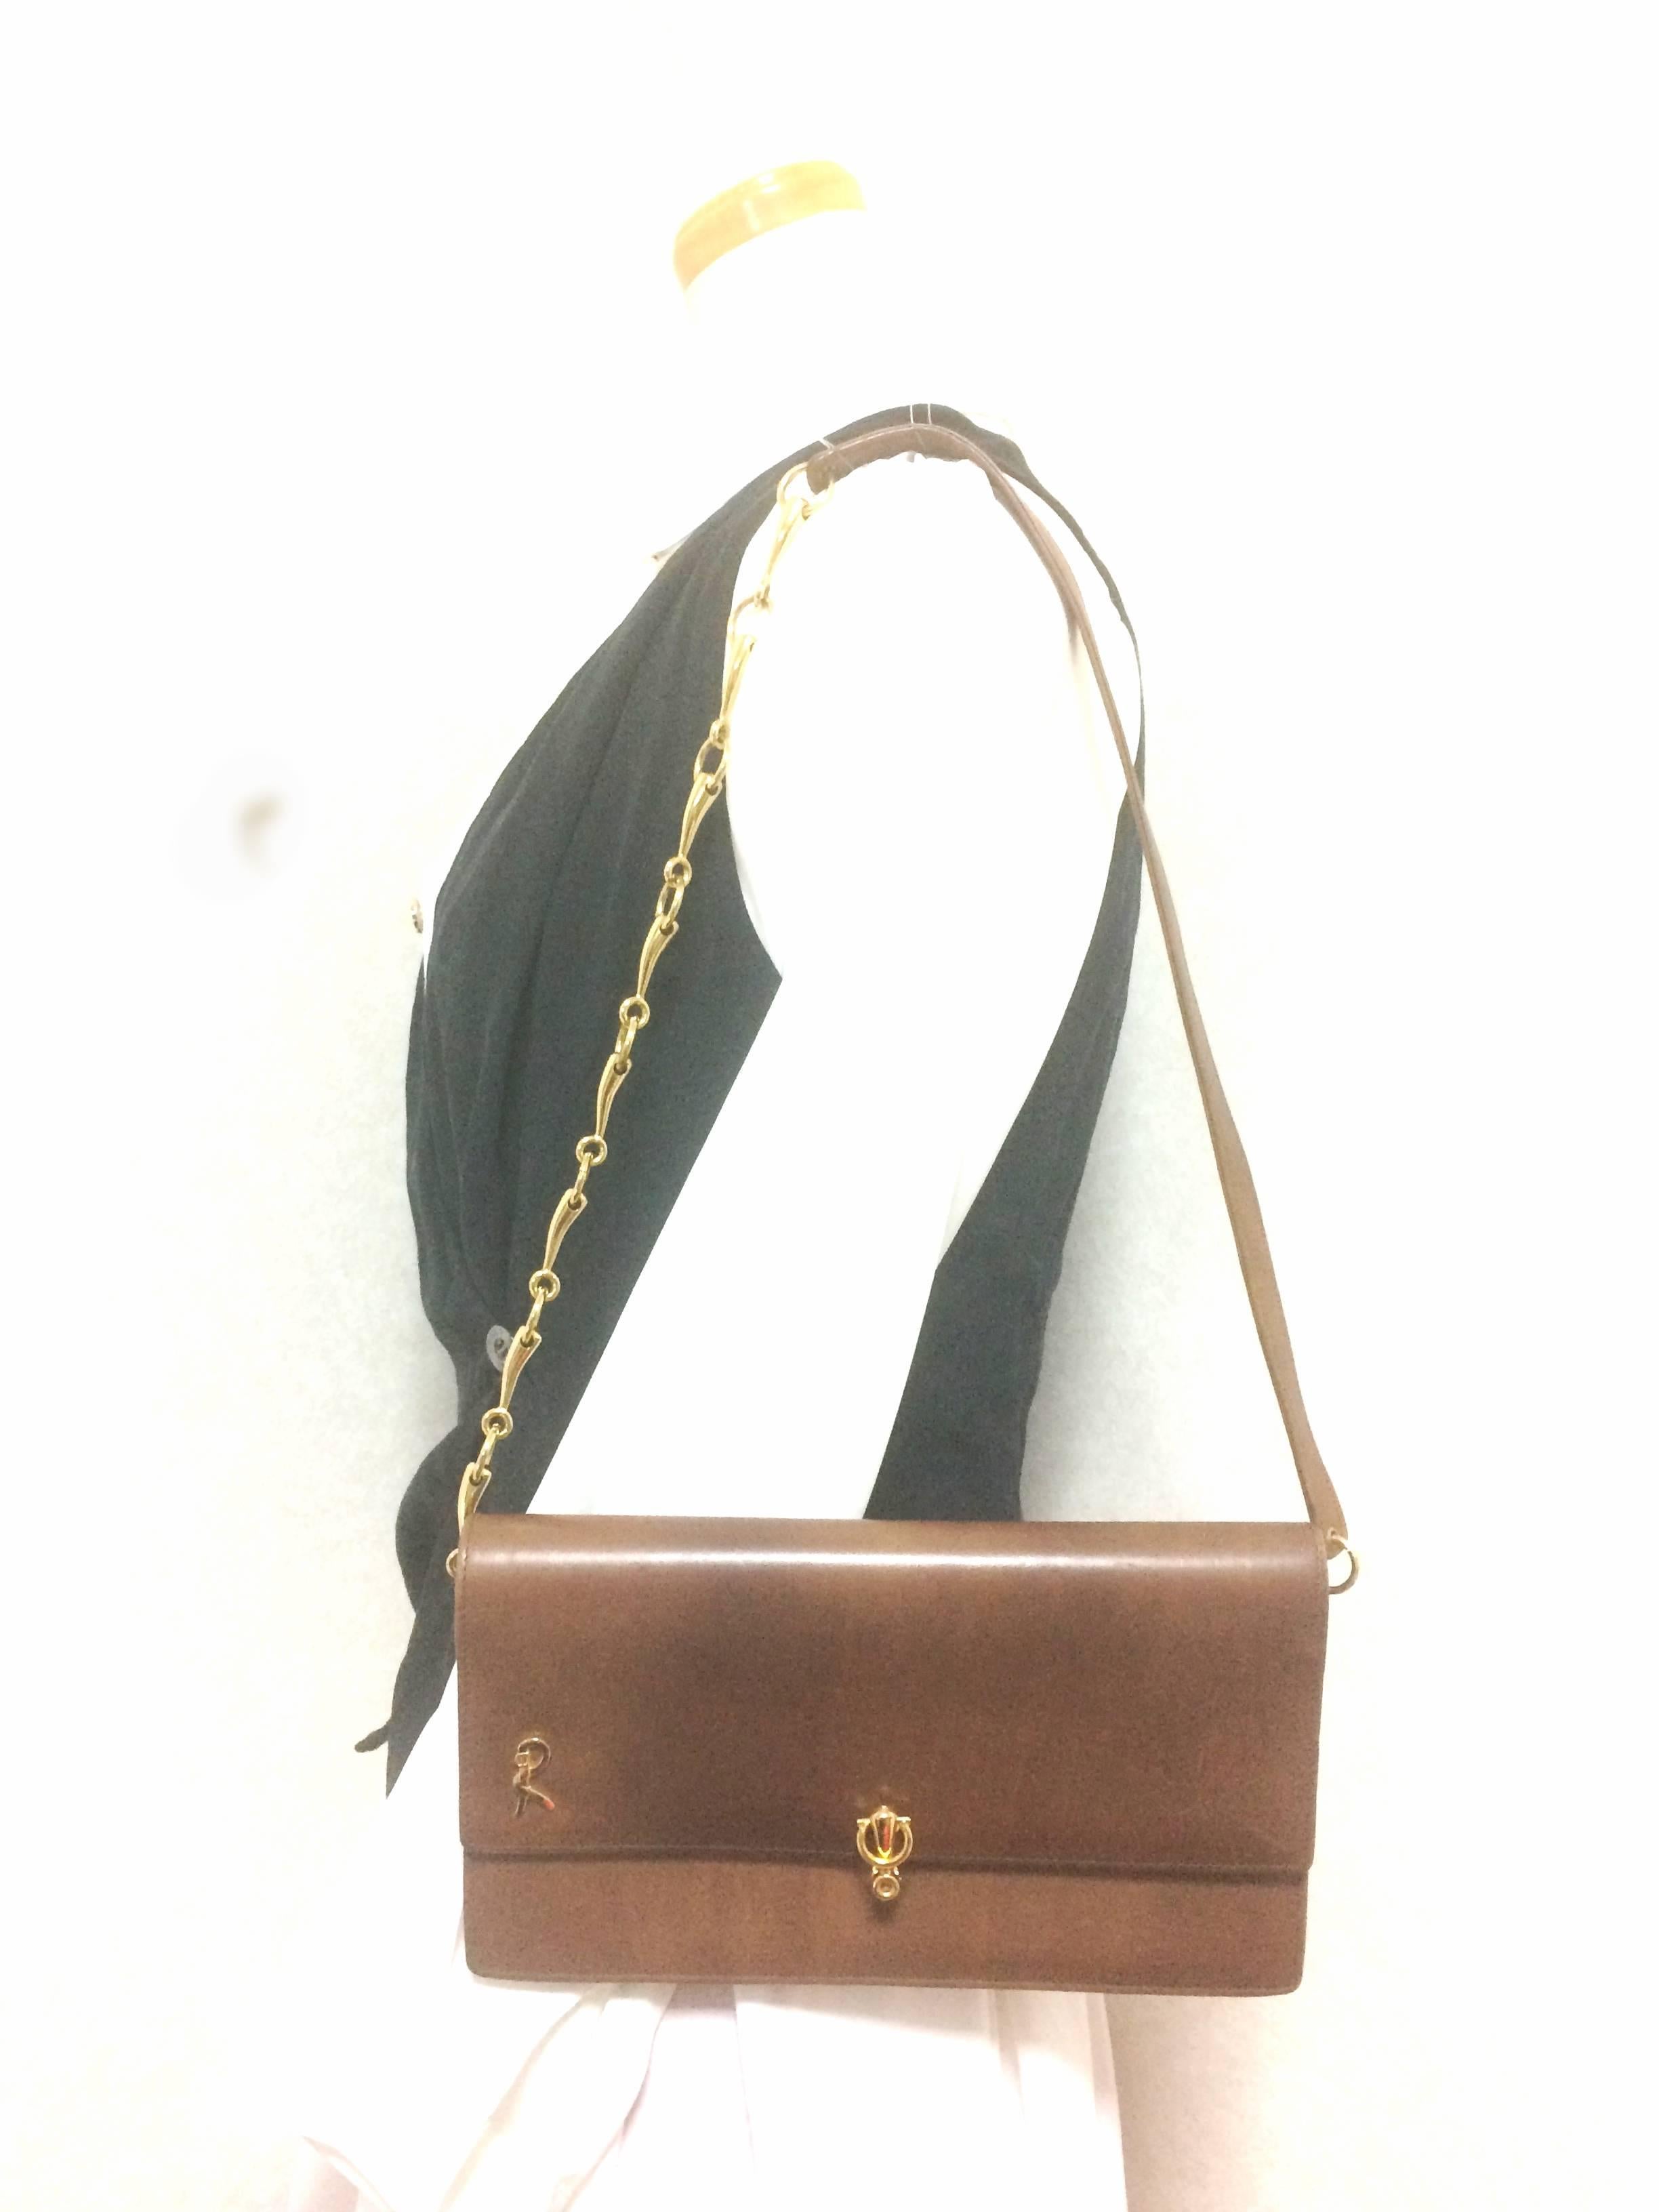 Vintage Roberta di Camerino brown leather chain shoulder bag with golden R logo  For Sale 2